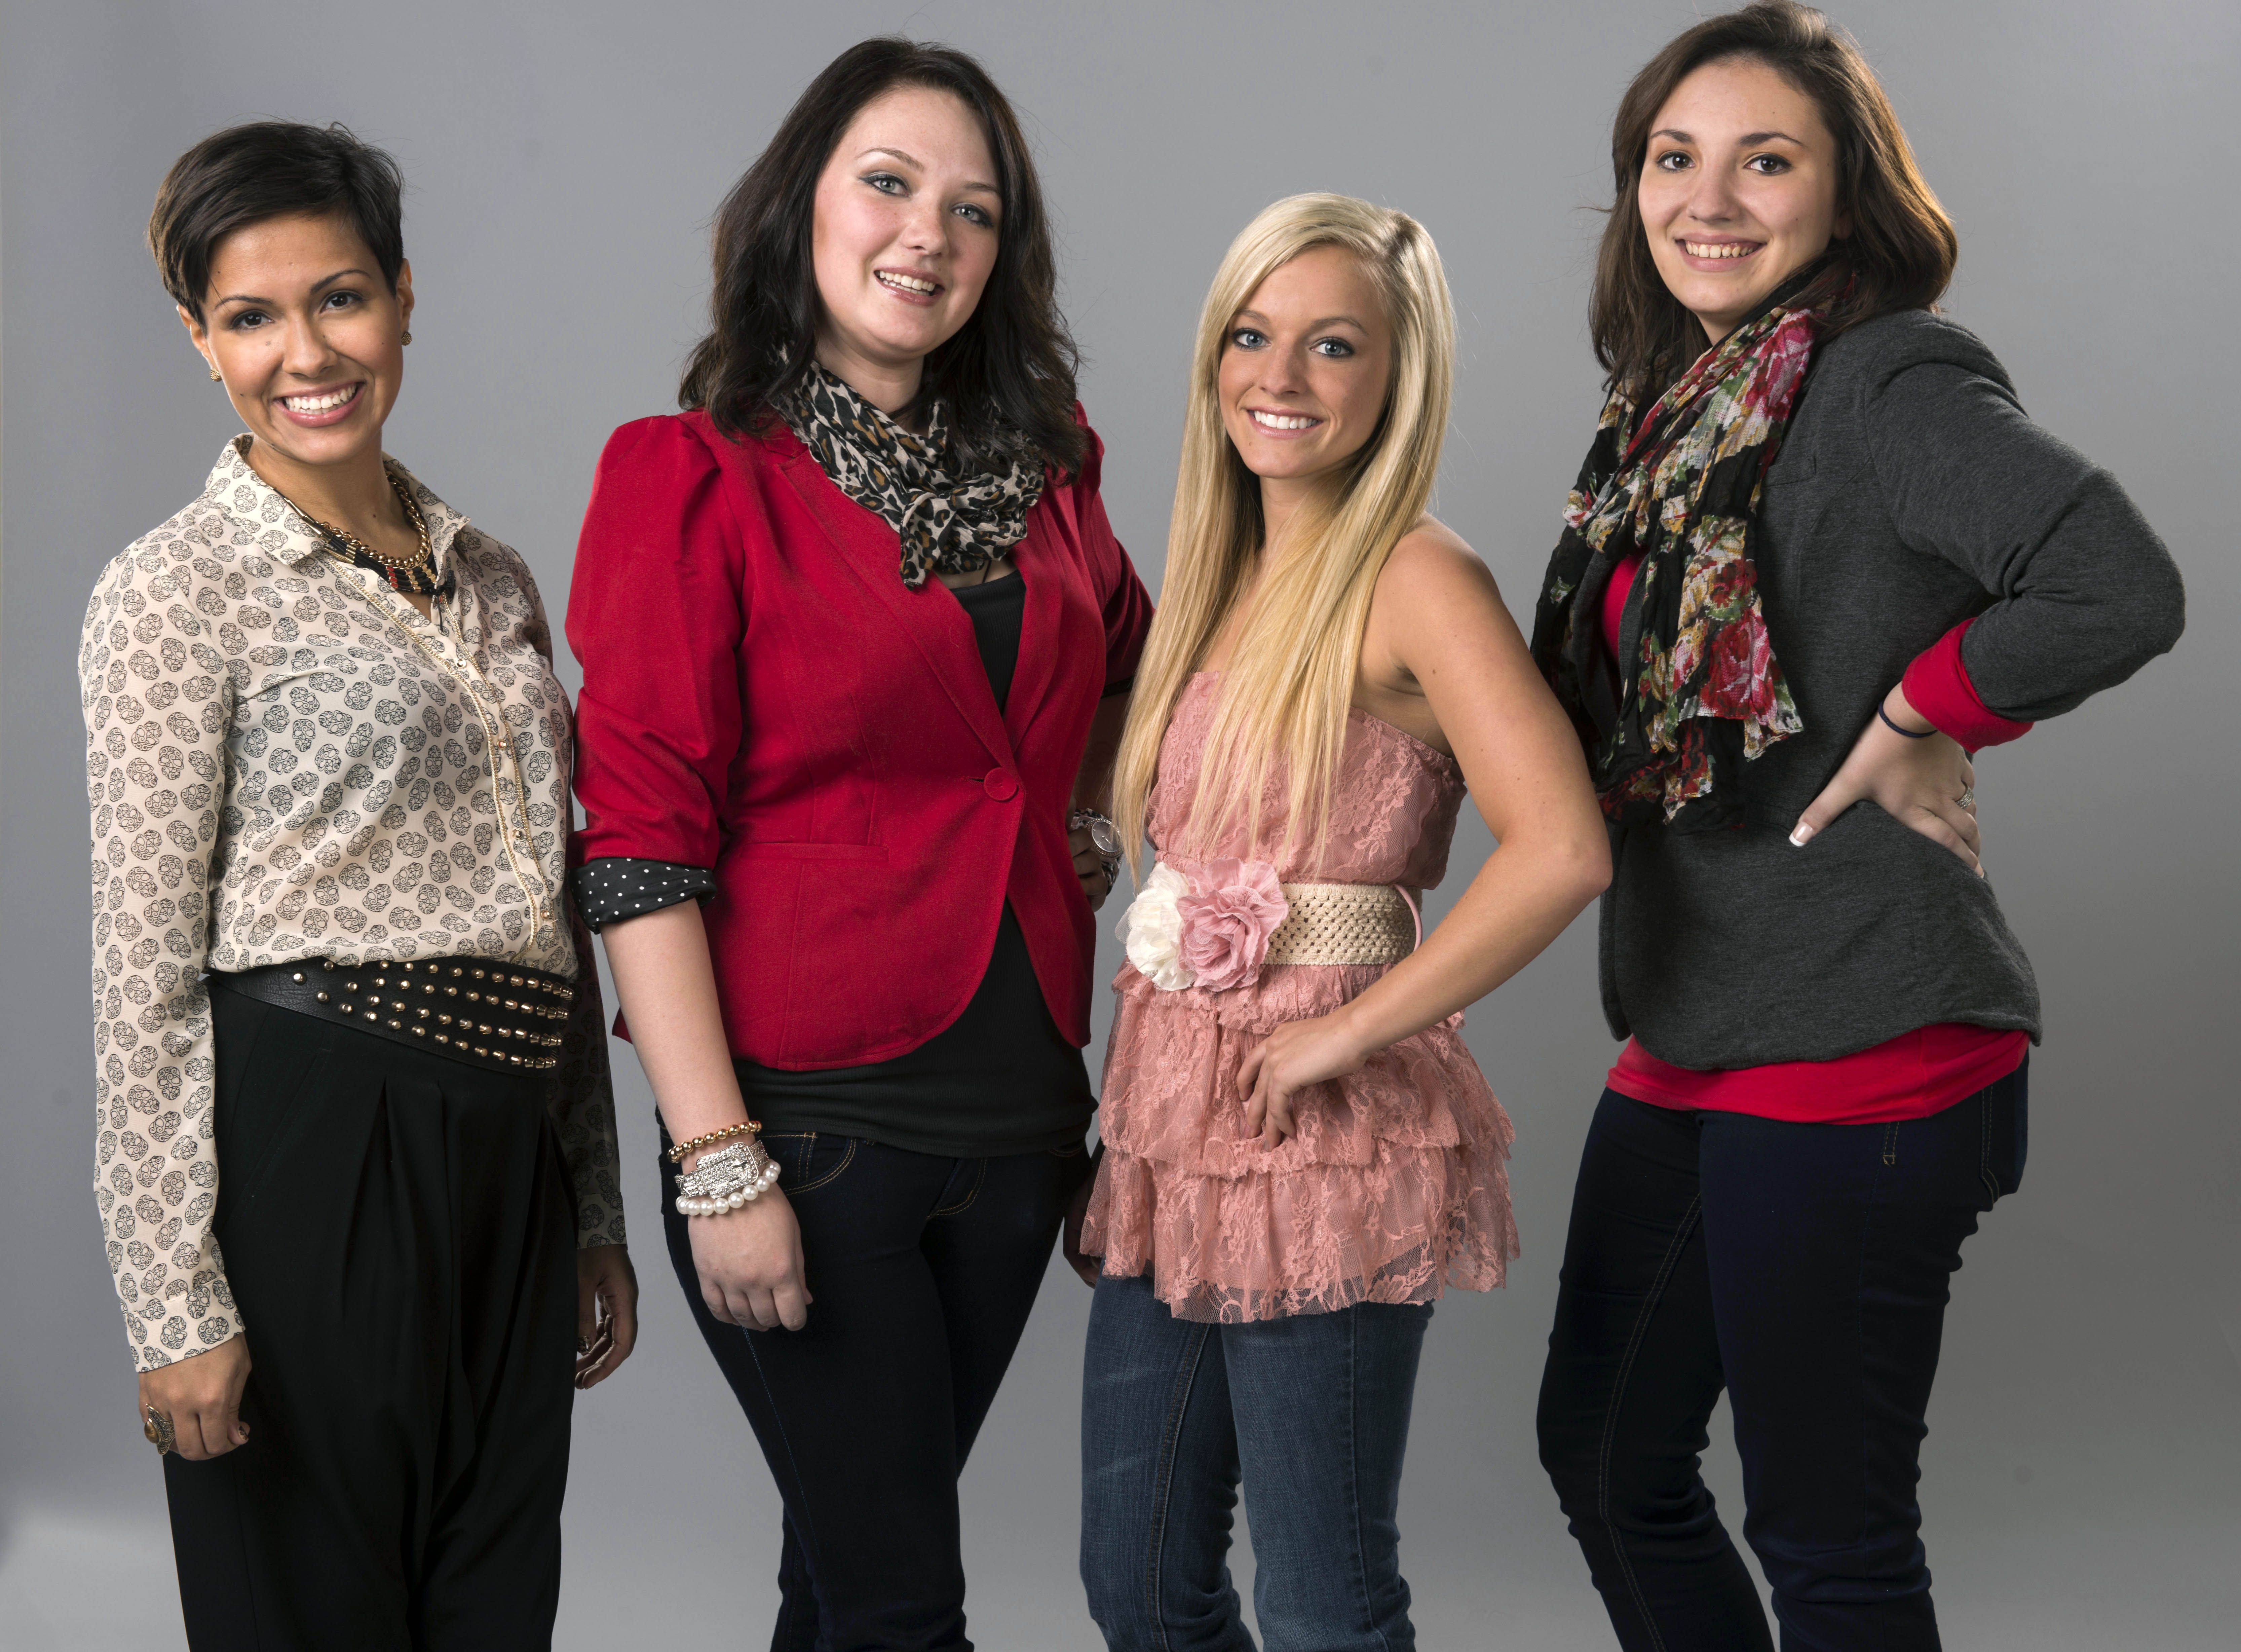 Briana DeJesus, Katie Yeager, Mackenzie McKee, and Alexandria Sekella standing next to each other and smiling for 'Teen Mom 3' cast photo